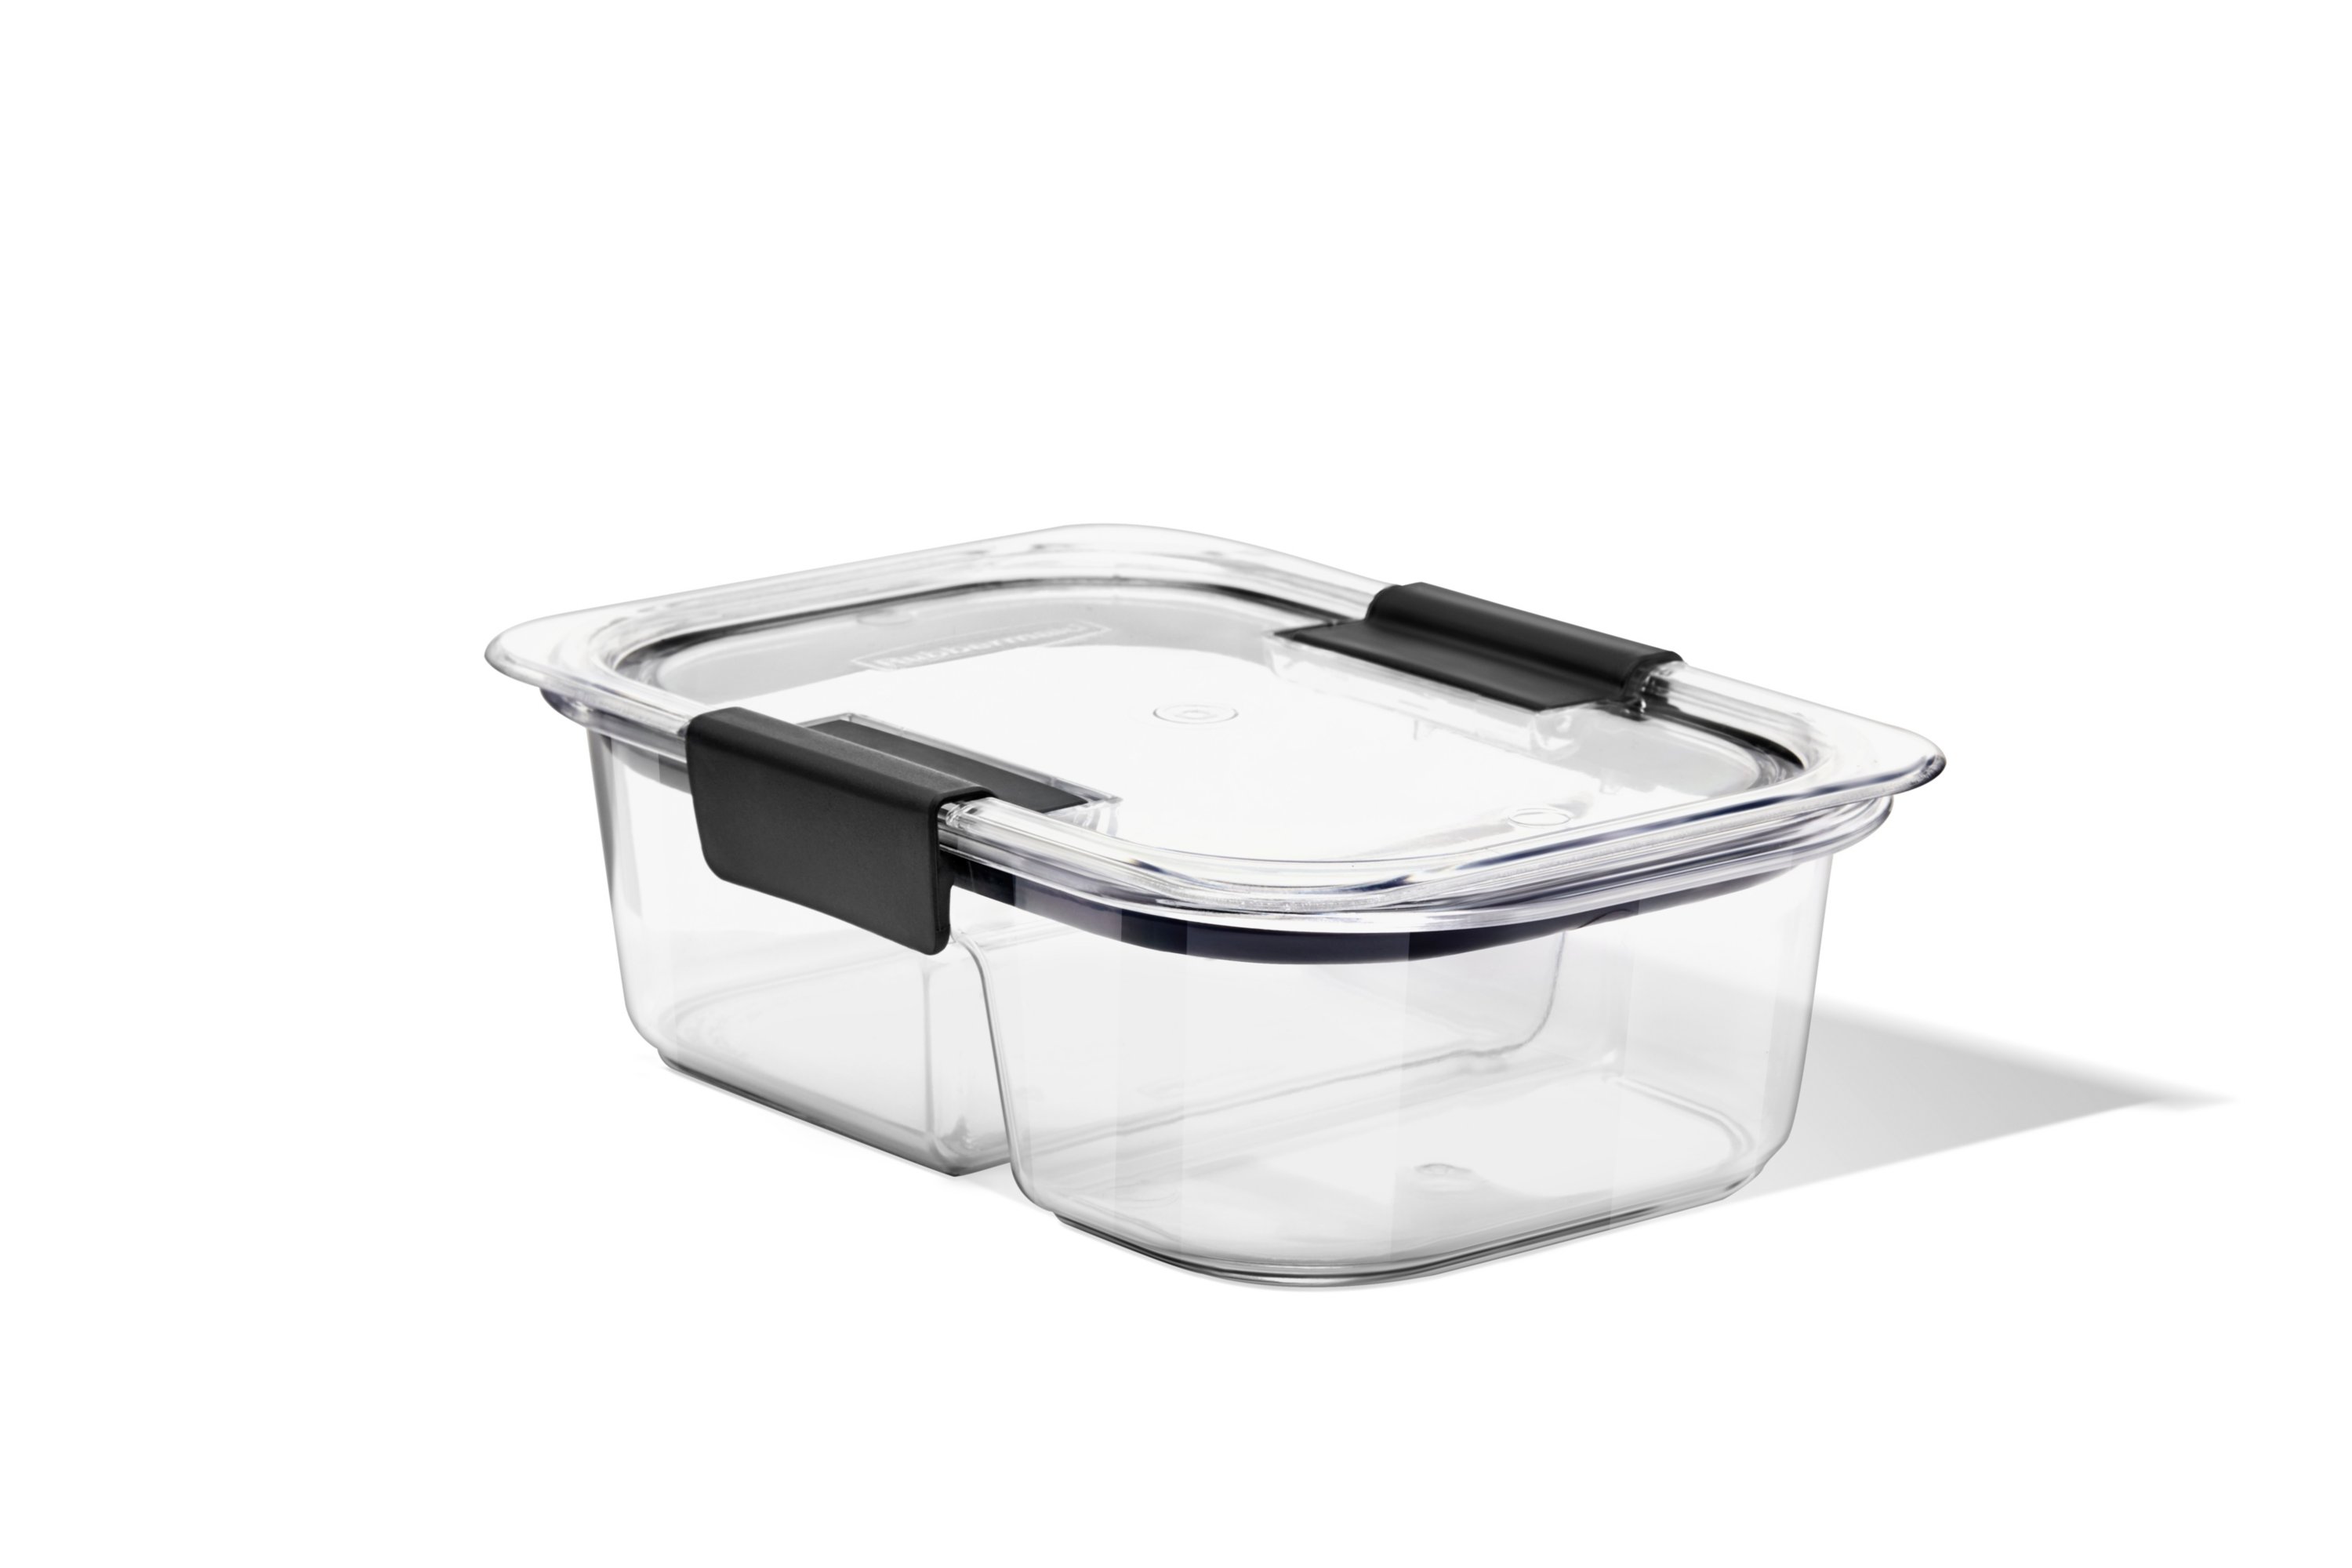 Rubbermaid® Brilliance Small Food Containers - Clear, 2 pk - City